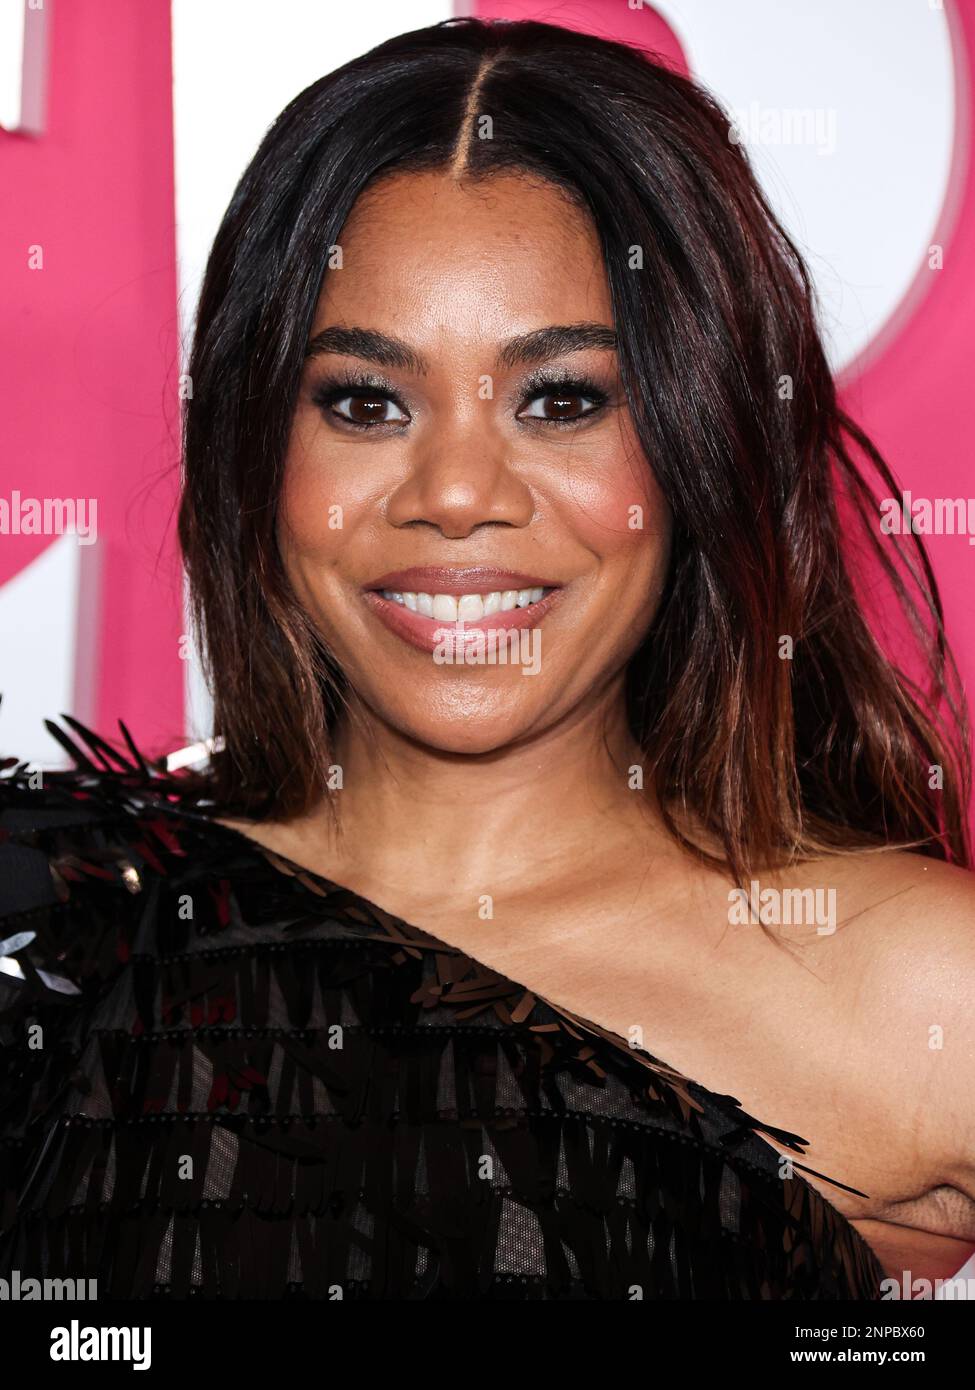 Pasadena, United States. 25th Feb, 2023. PASADENA, LOS ANGELES, CALIFORNIA, USA - FEBRUARY 25: American actress Regina Hall carrying Tyler Ellis poses in the press room at the 54th Annual NAACP Image Awards held at the Pasadena Civic Auditorium on February 25, 2023 in Pasadena, Los Angeles, California, United States. (Photo by Xavier Collin/Image Press Agency) Credit: Image Press Agency/Alamy Live News Stock Photo